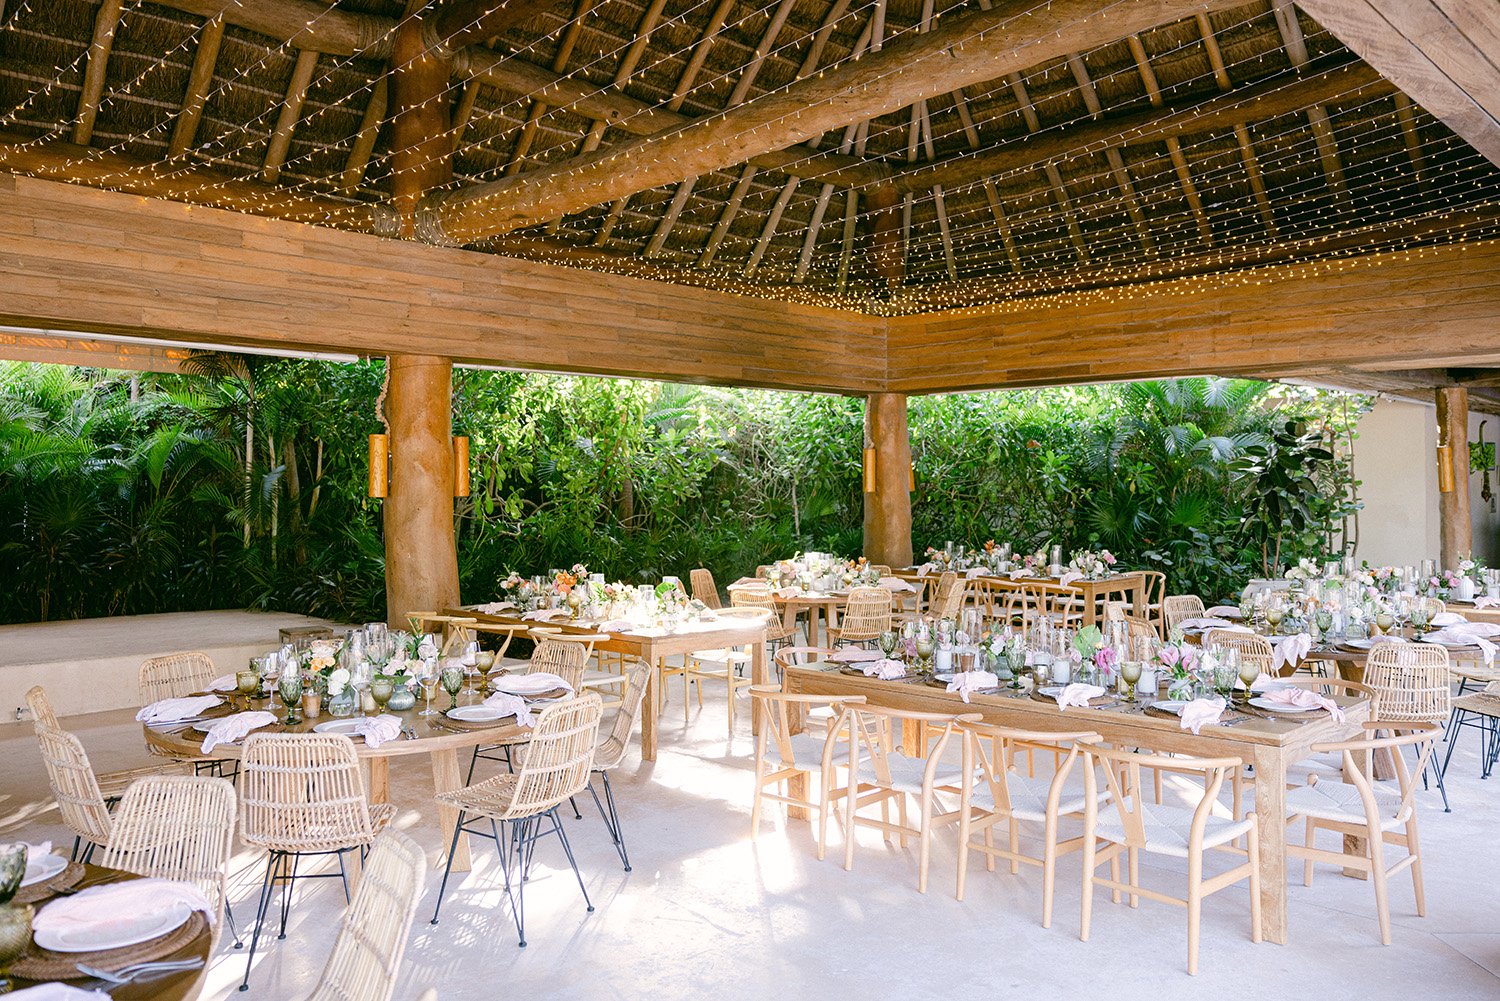 32 nice wedding reception decoration tables with lights on the palm ceiling at Rosewood Mayakoba Riviera Maya Cancun.JPG